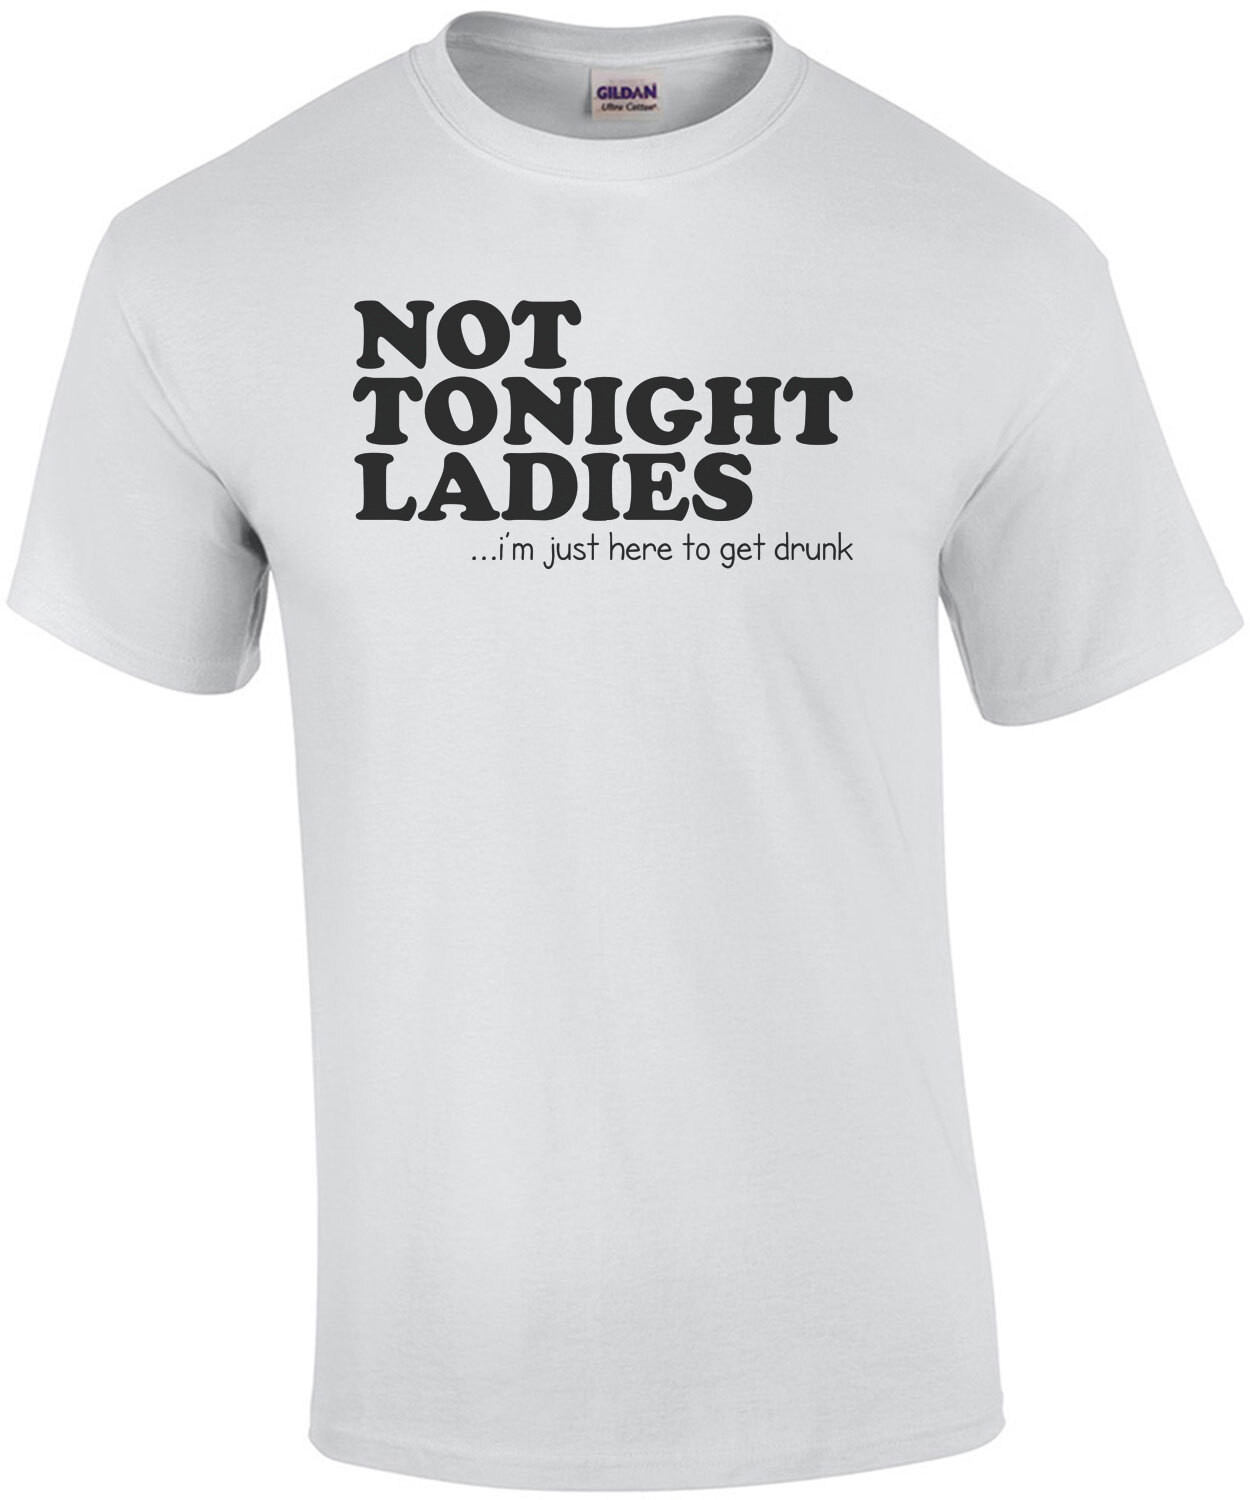 Not Tonight Ladies, I'm Just Here To Get Drunk Funny Shirt